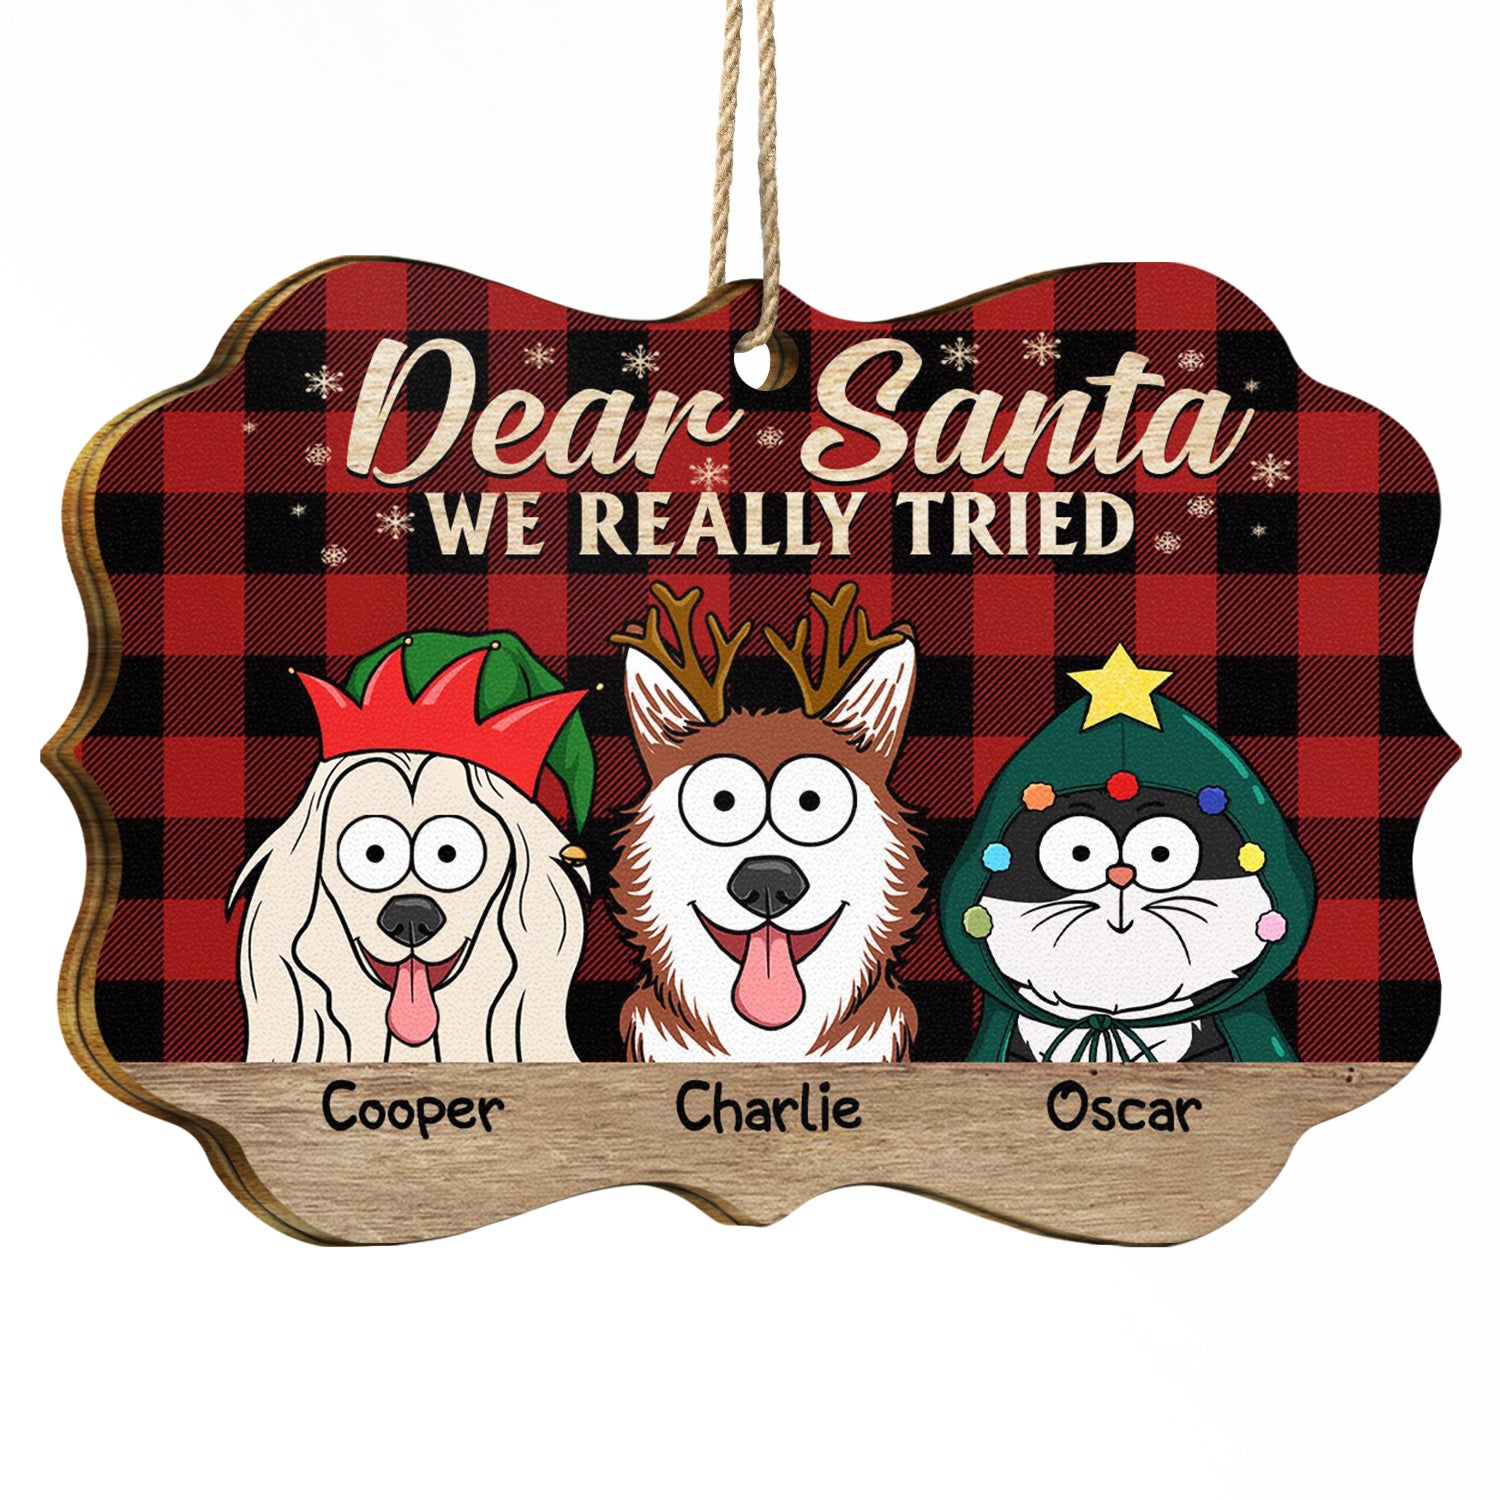 Dear Santa We Really Tried - Christmas Gift For Dog Lovers, Cat Lovers - Personalized Medallion Wooden Ornament